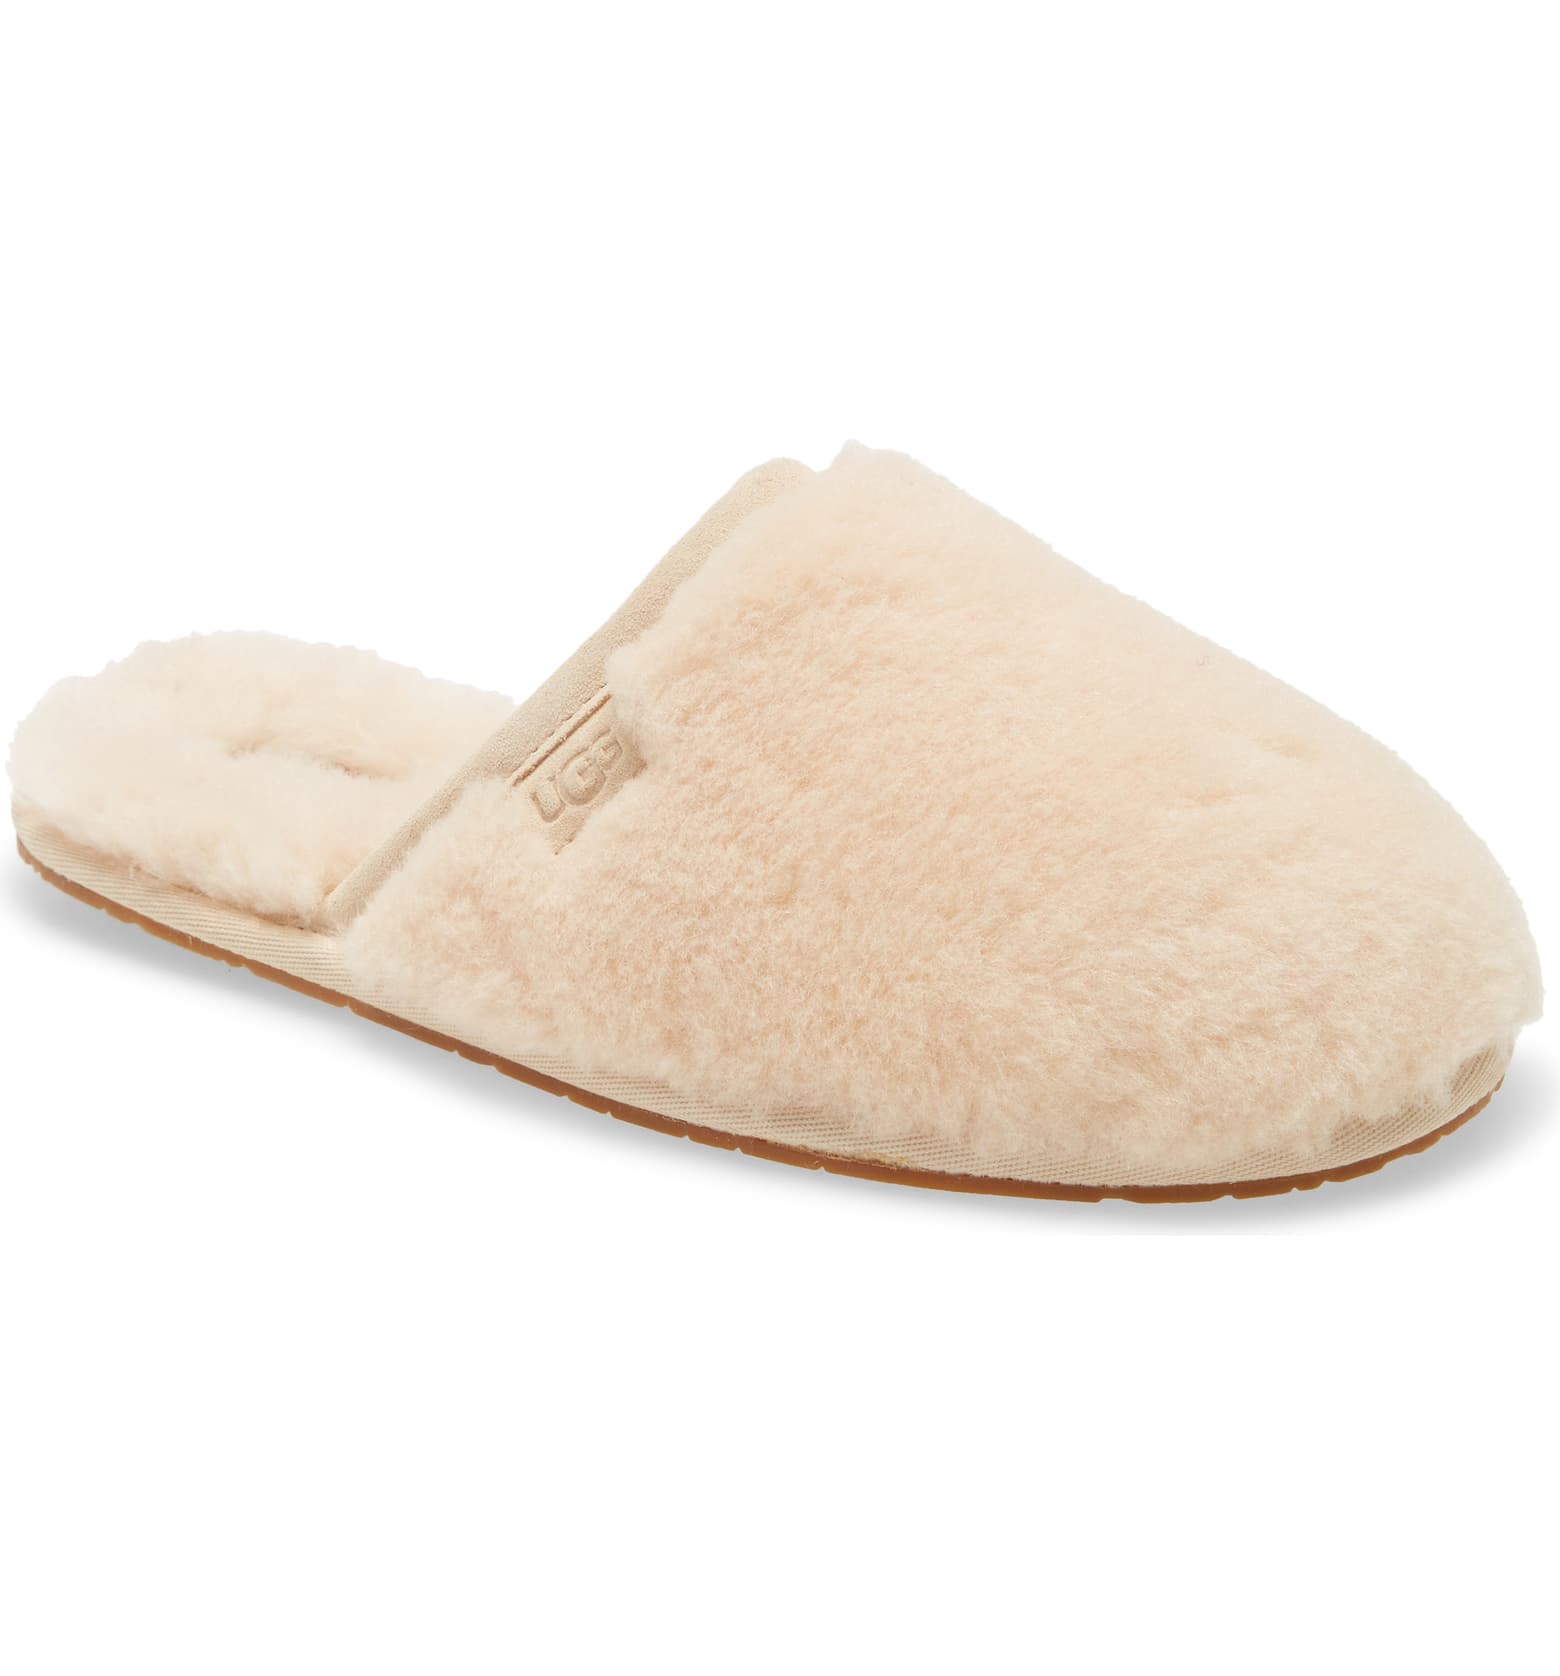 nordstrom anniversary sale 2020 cheap ugg slippers